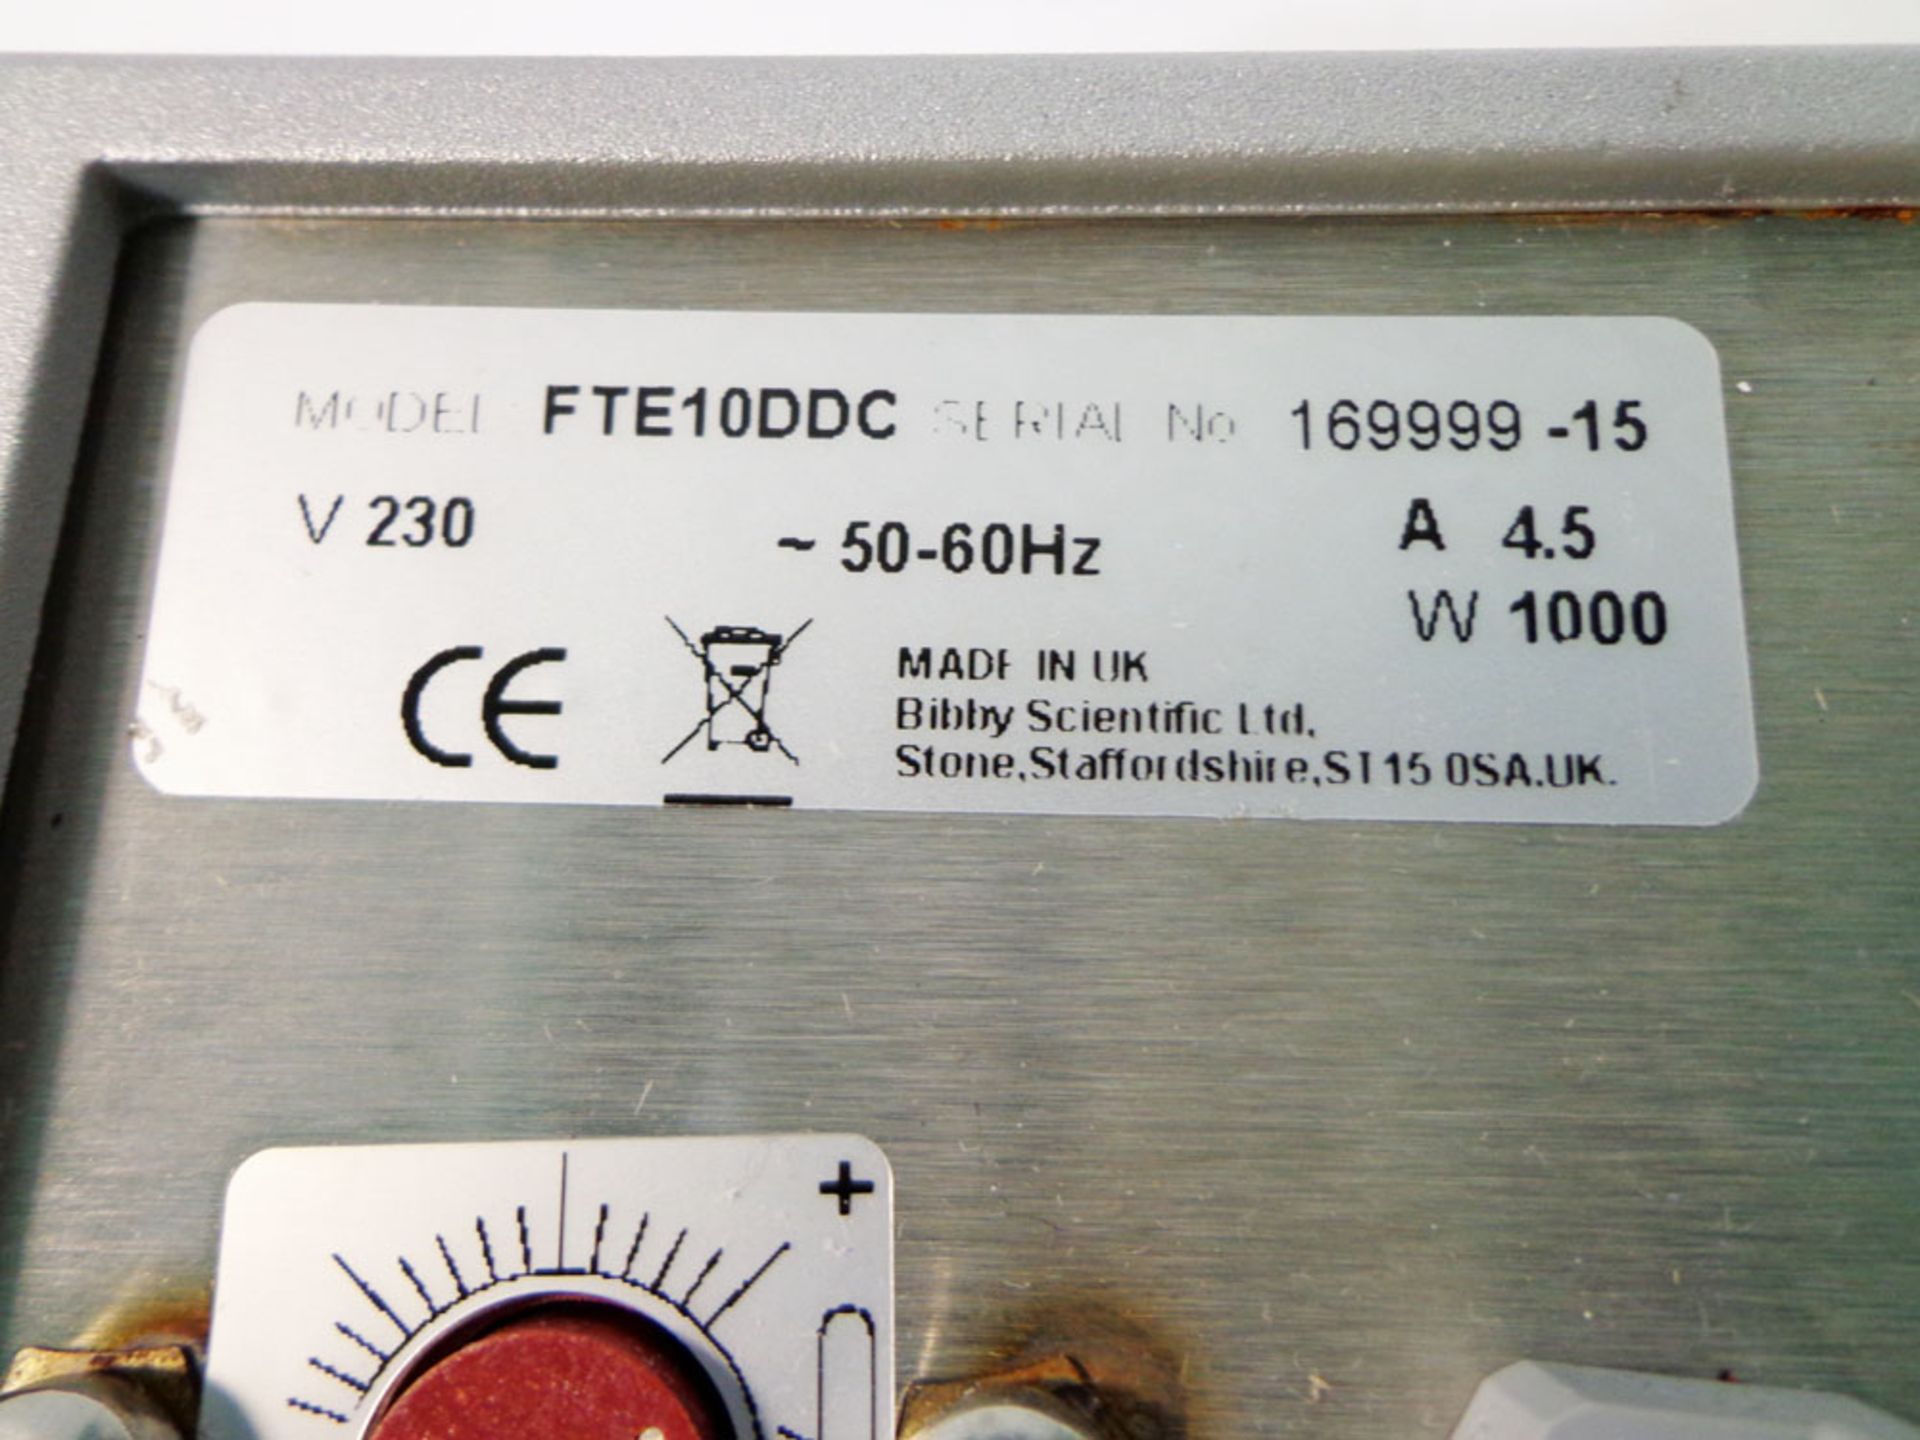 Techne Thermoregulator TE-10 Tempette FTE10DDC, S/N 169999-15 - Image 4 of 5